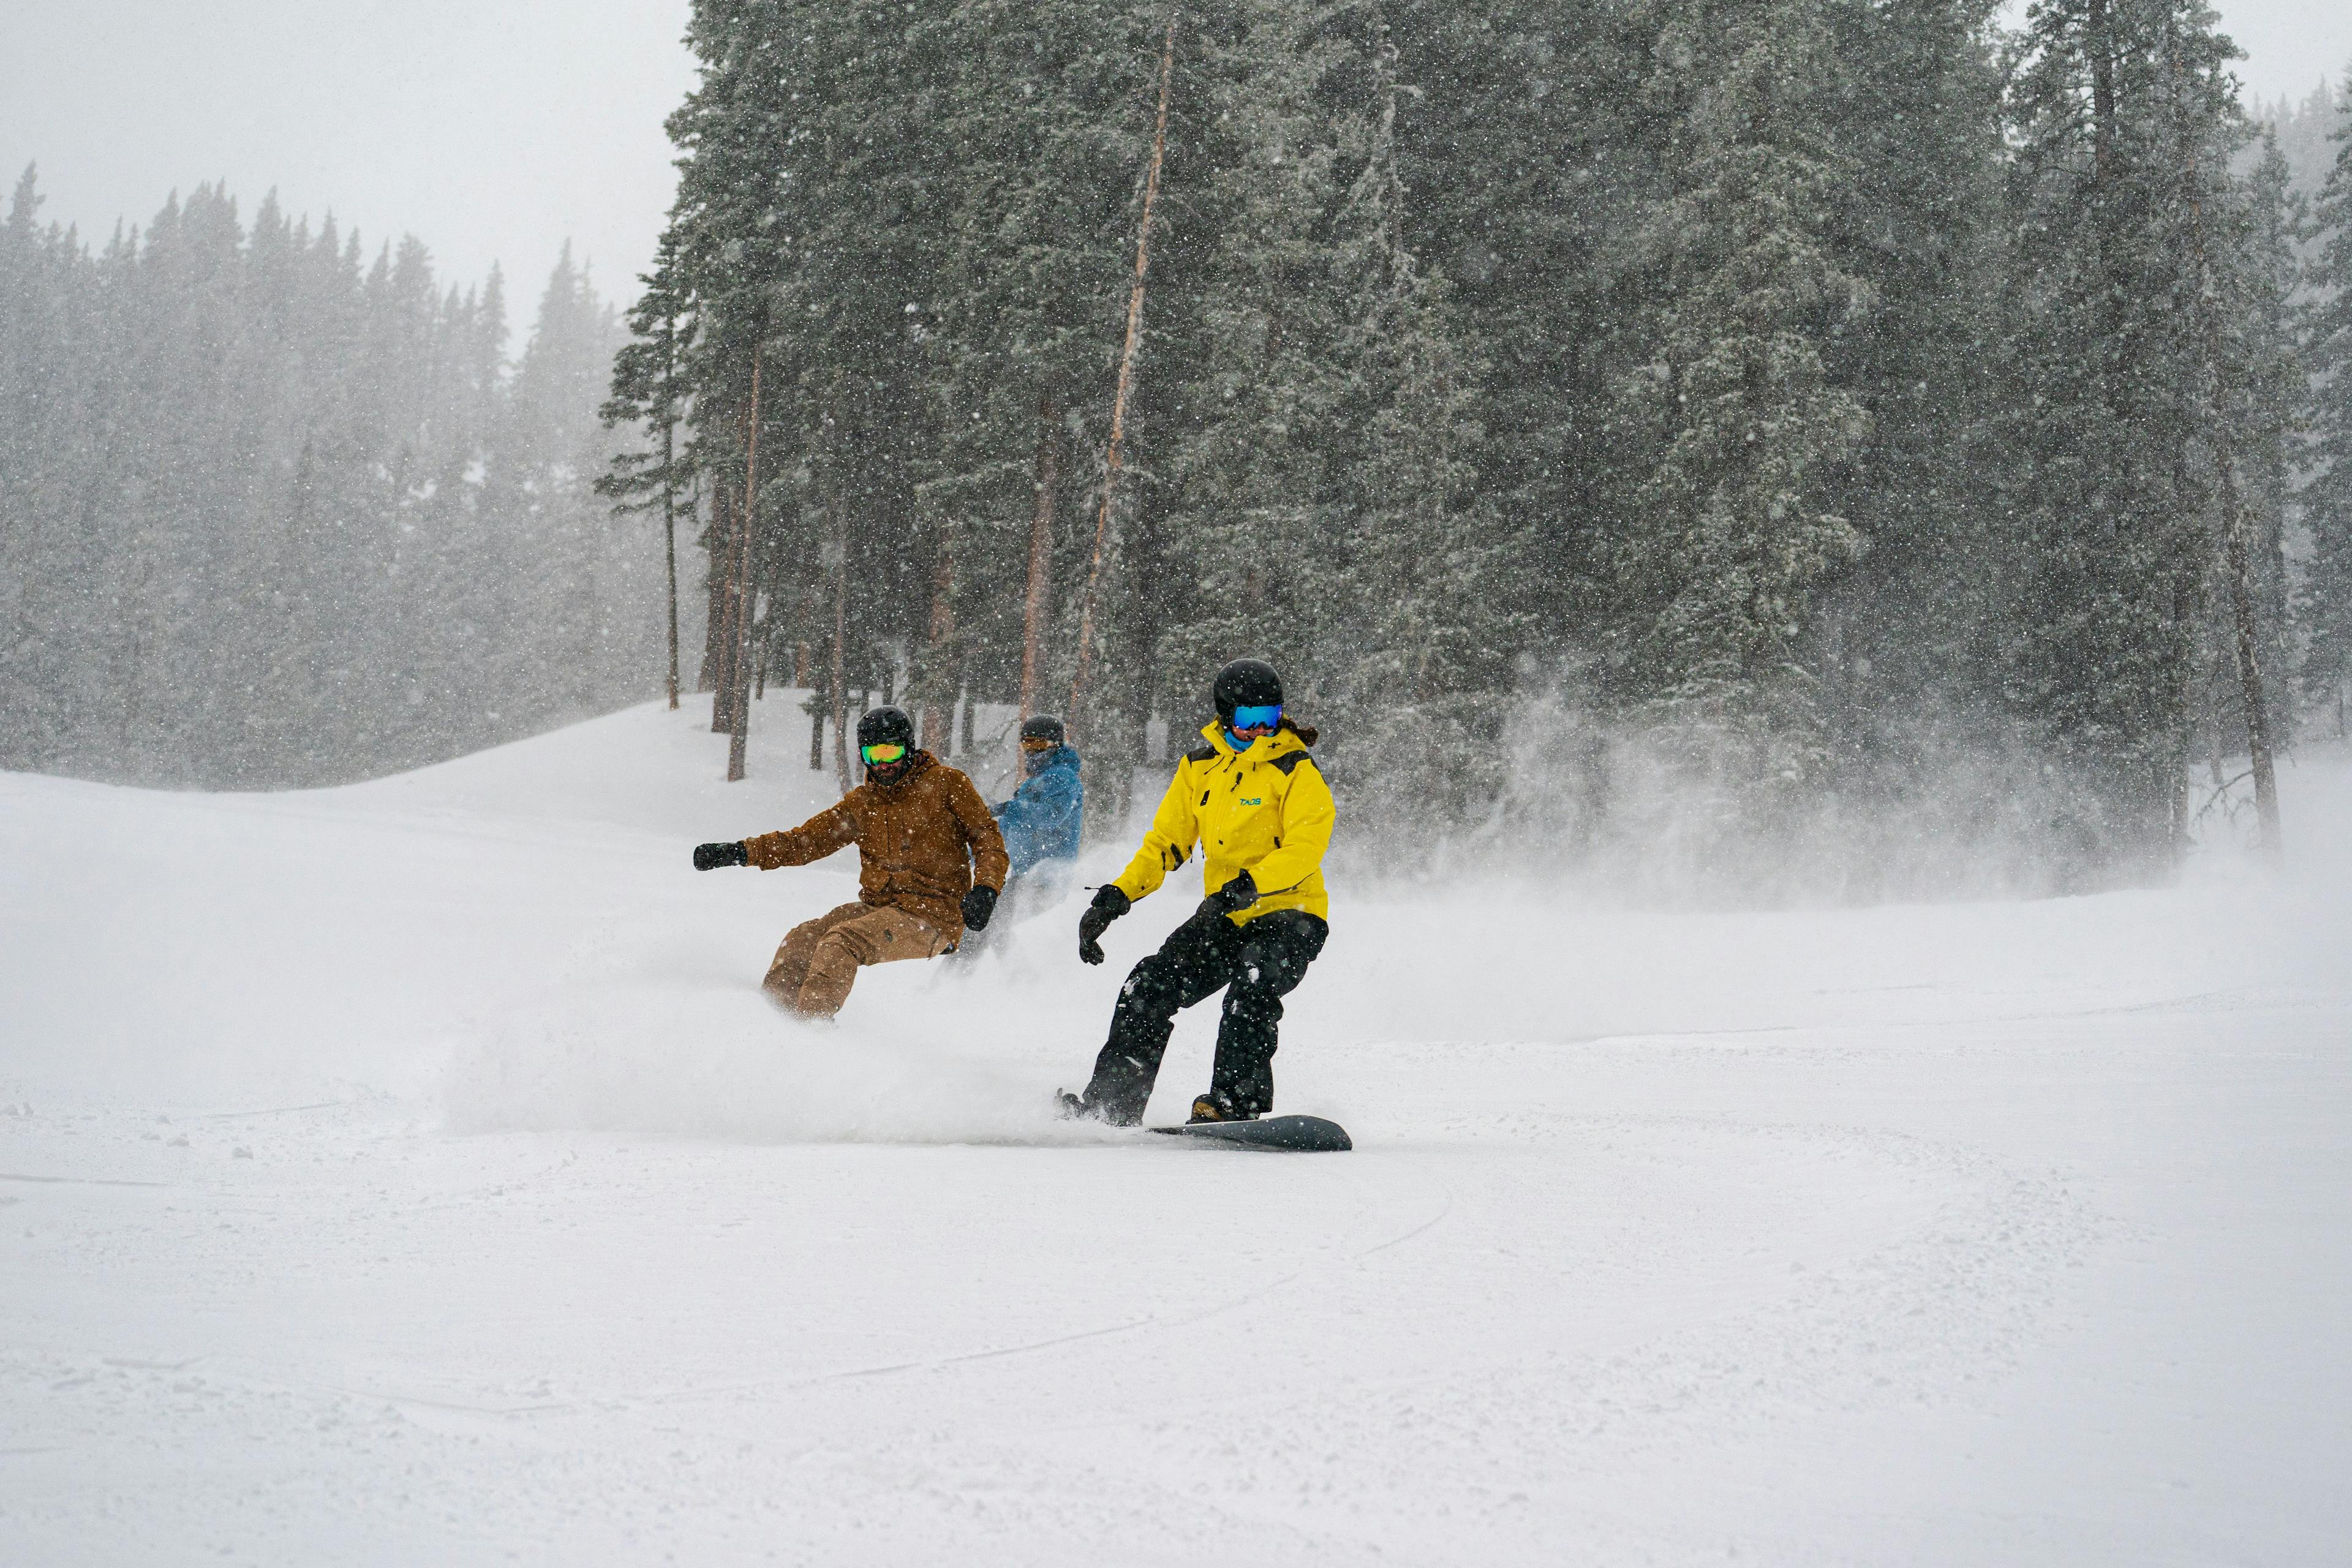 Snowboarders taking a lesson at Taos Ski Valley.